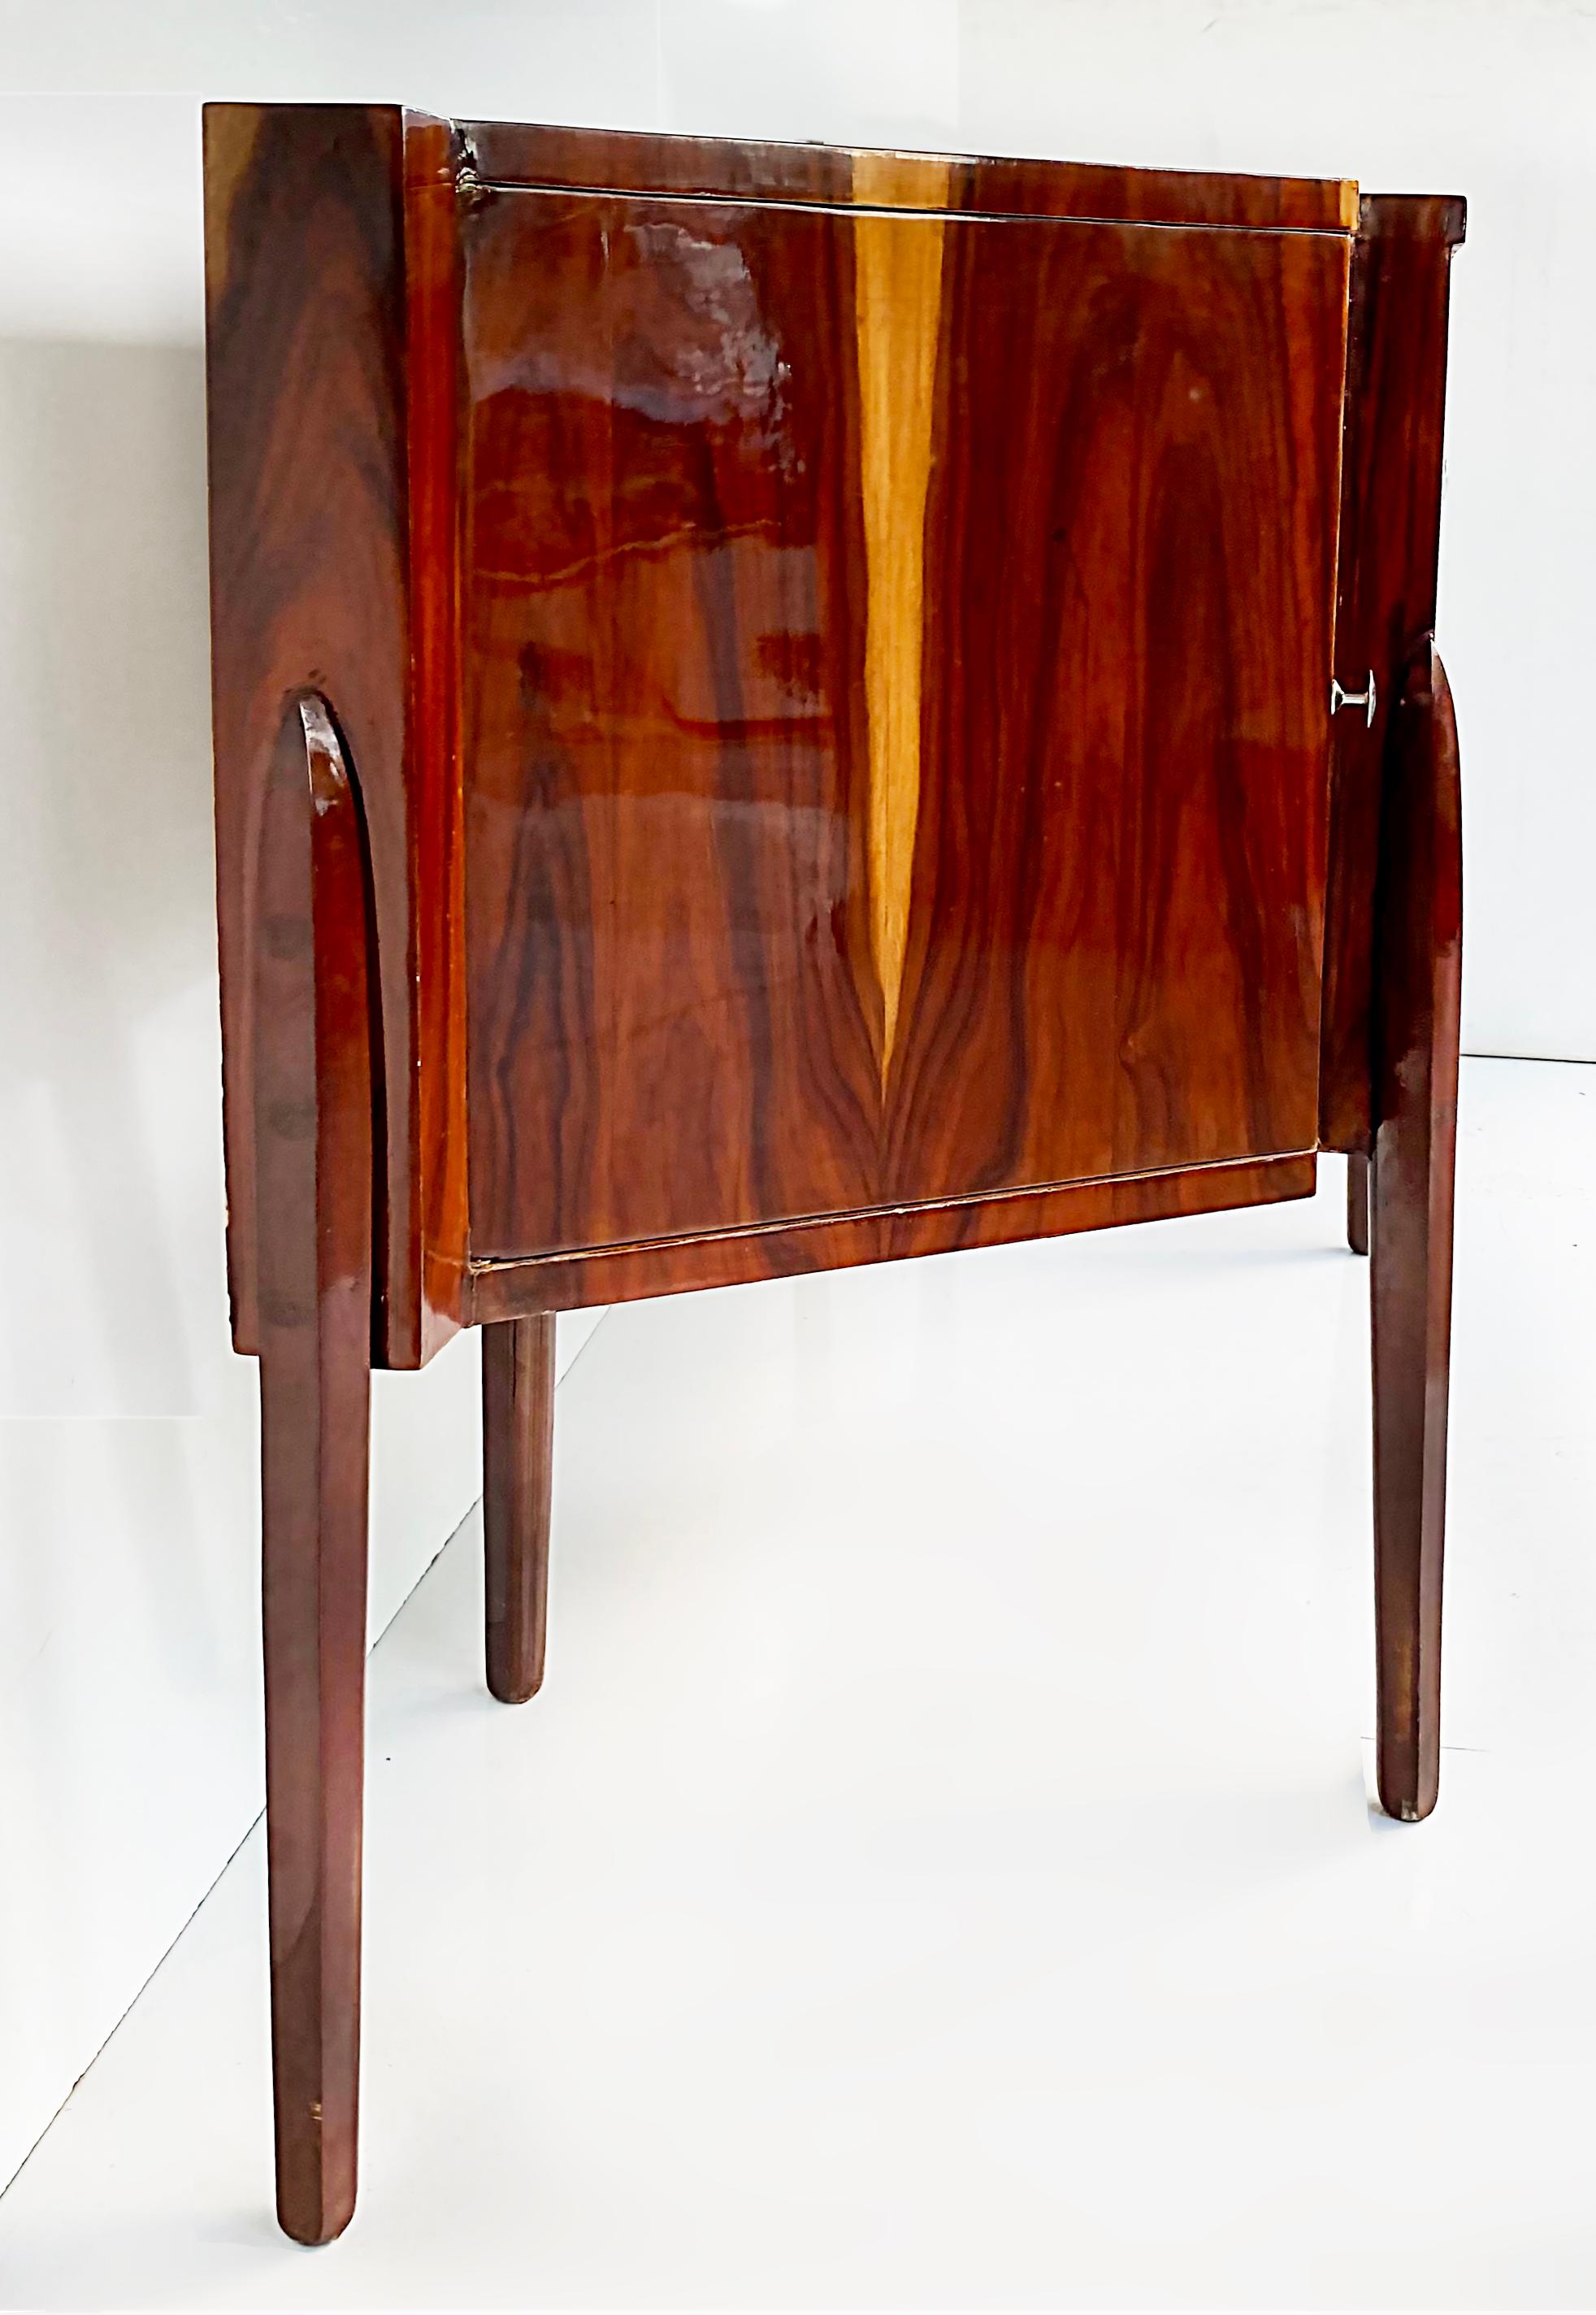 20th Century Gio Ponti Style Art Deco Exotic Wood Four Door Cabinet with Painted Decoration